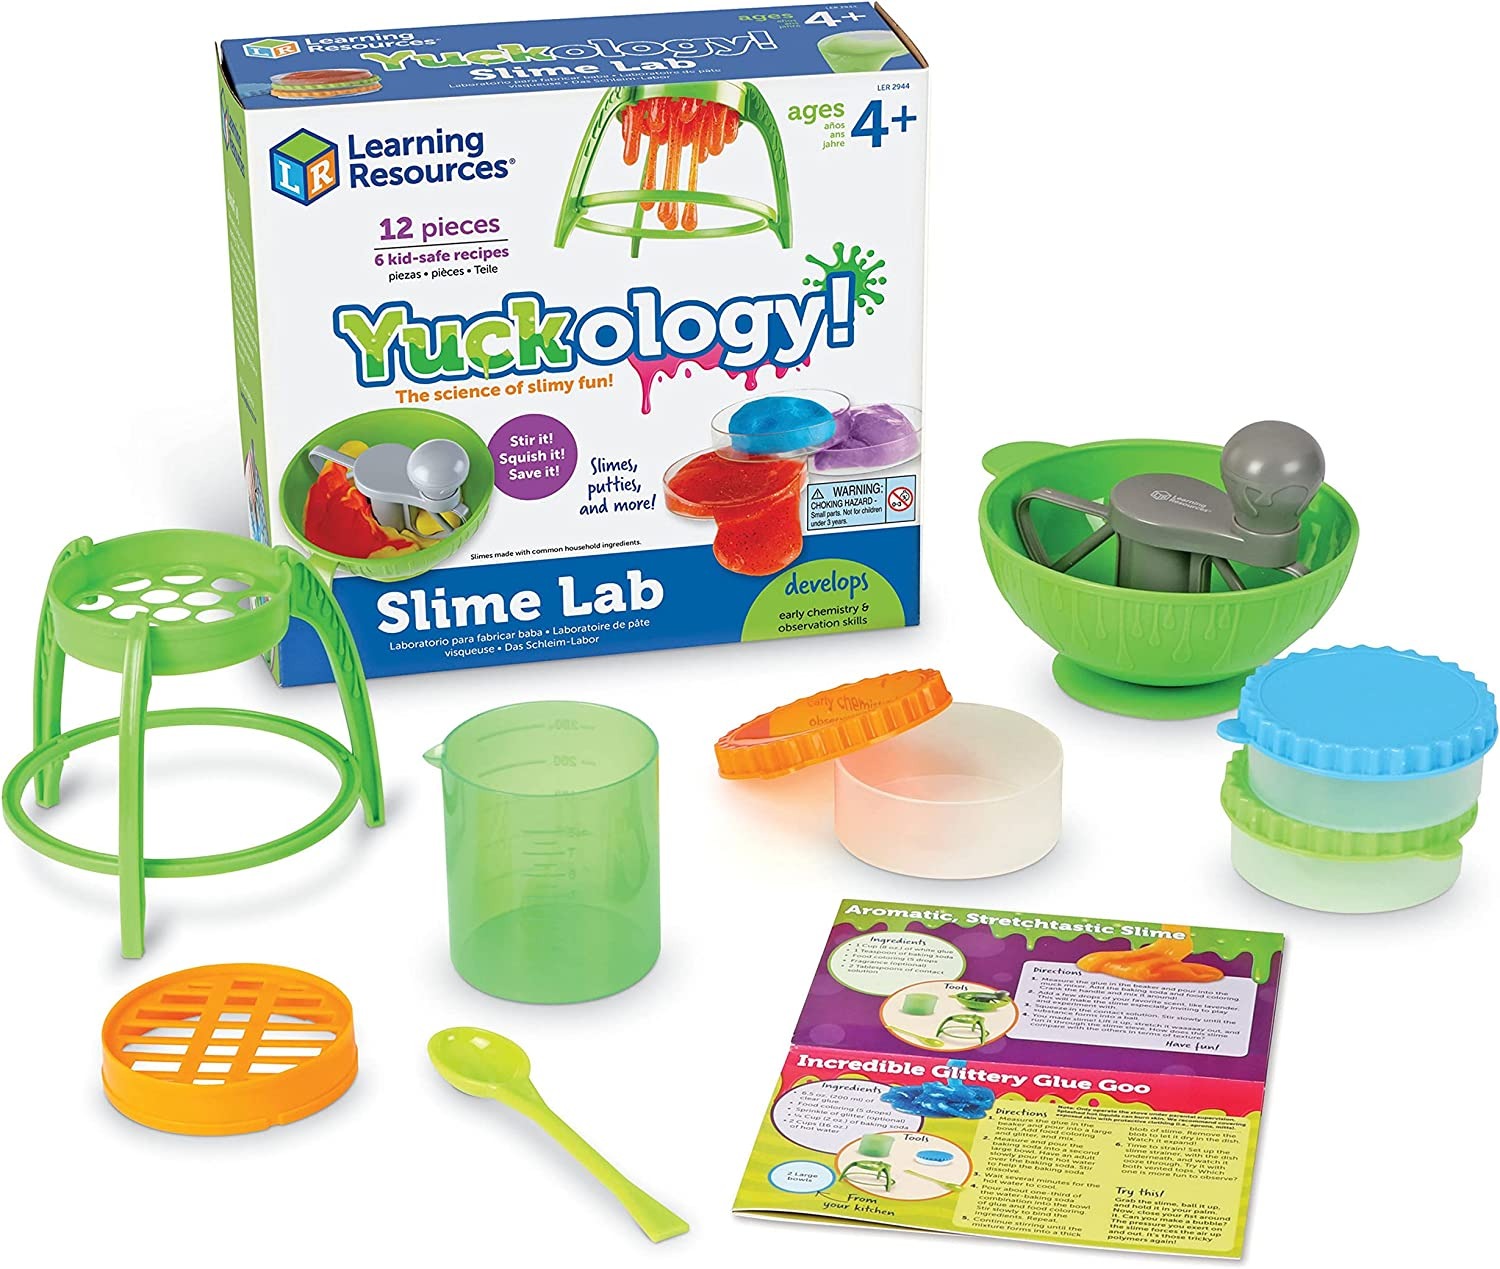 Learning Resources Yuckology Slime Lab, Yuck! Make and store your grossest goo with the Yuckology! Slime Lab. Use the Yuckology Slime Lab to get messy with some super slime making, action fun! The Yuckology! Slime lab allows children to learn the science behind how to make slime in a fun and exiting lab like environment. The Yuckology Slime Lab has easy to use hands-on tools and easy child-friendly recipes which develops early science skill development. Using common ingredients found around the house and ch